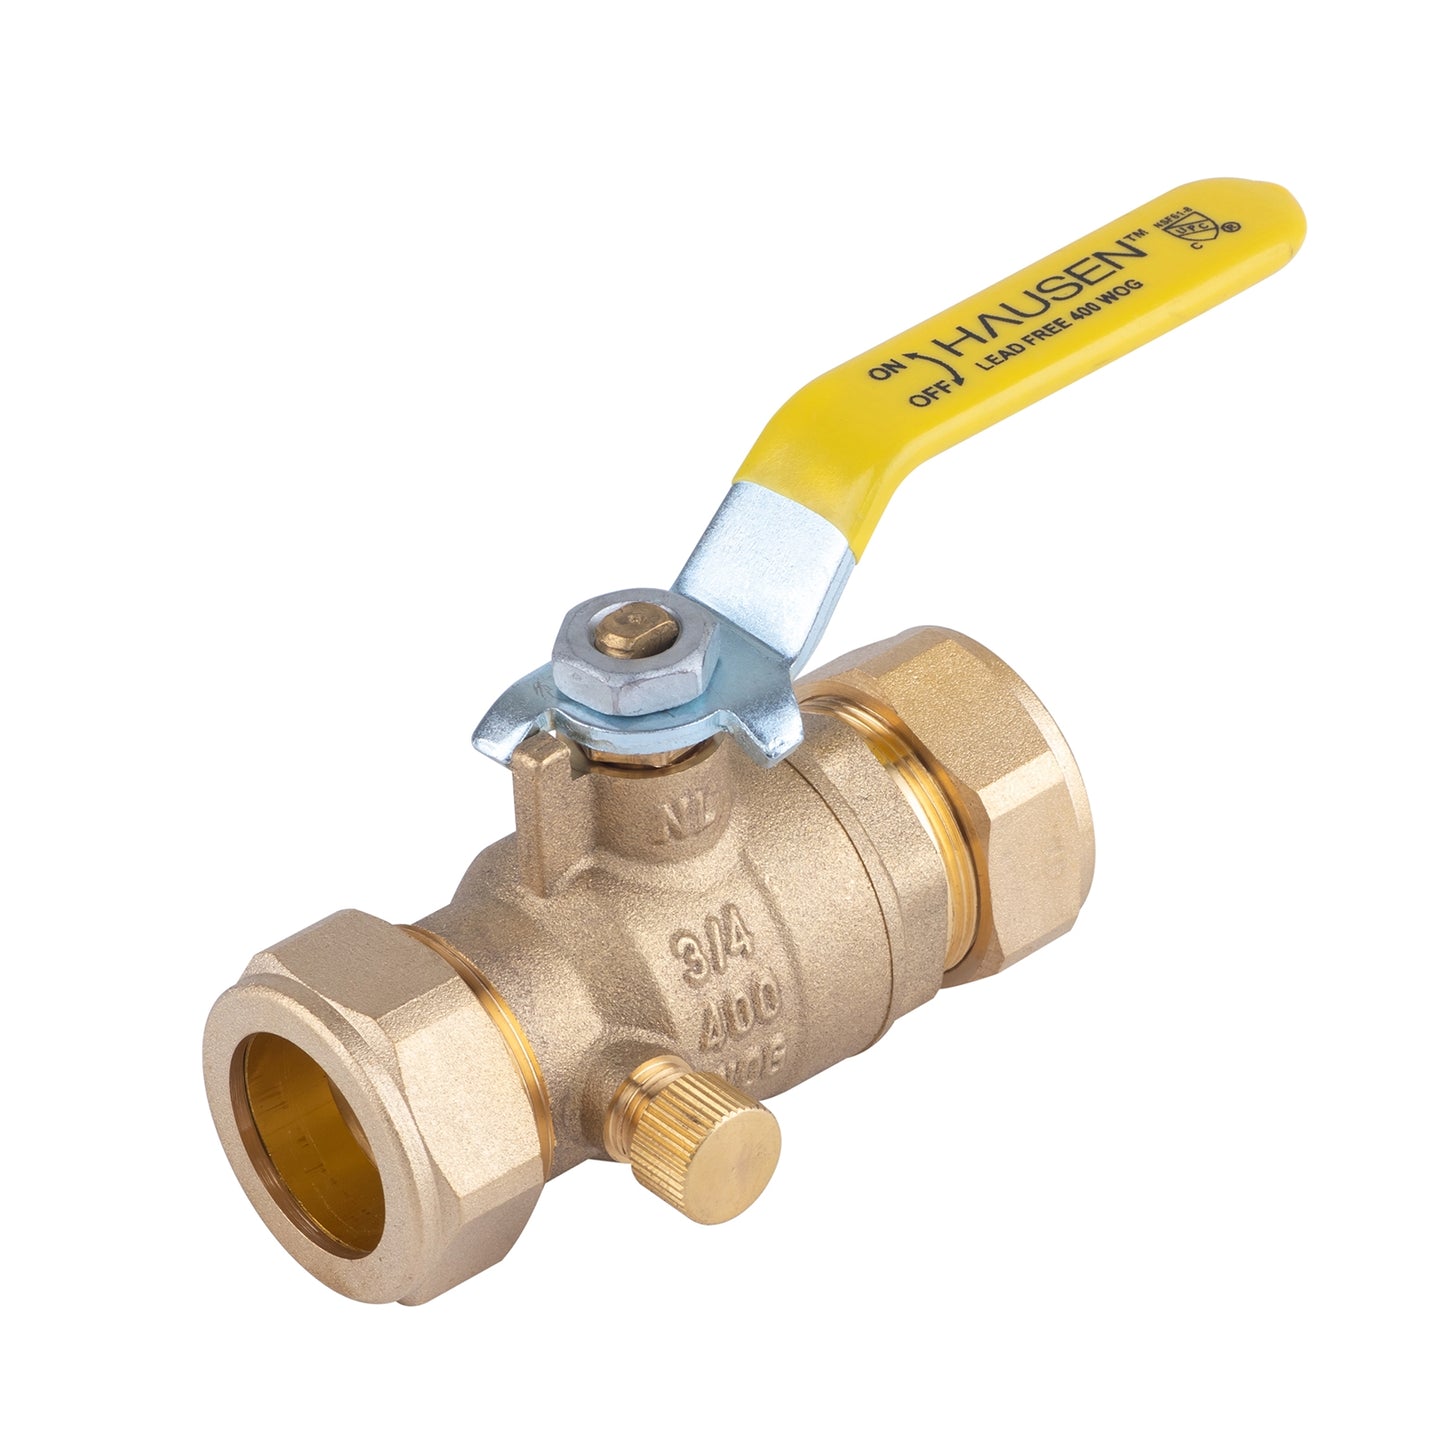 Hausen 3/4-inch Compression Standard Port Brass Ball Valve with Drain, 1-Pack